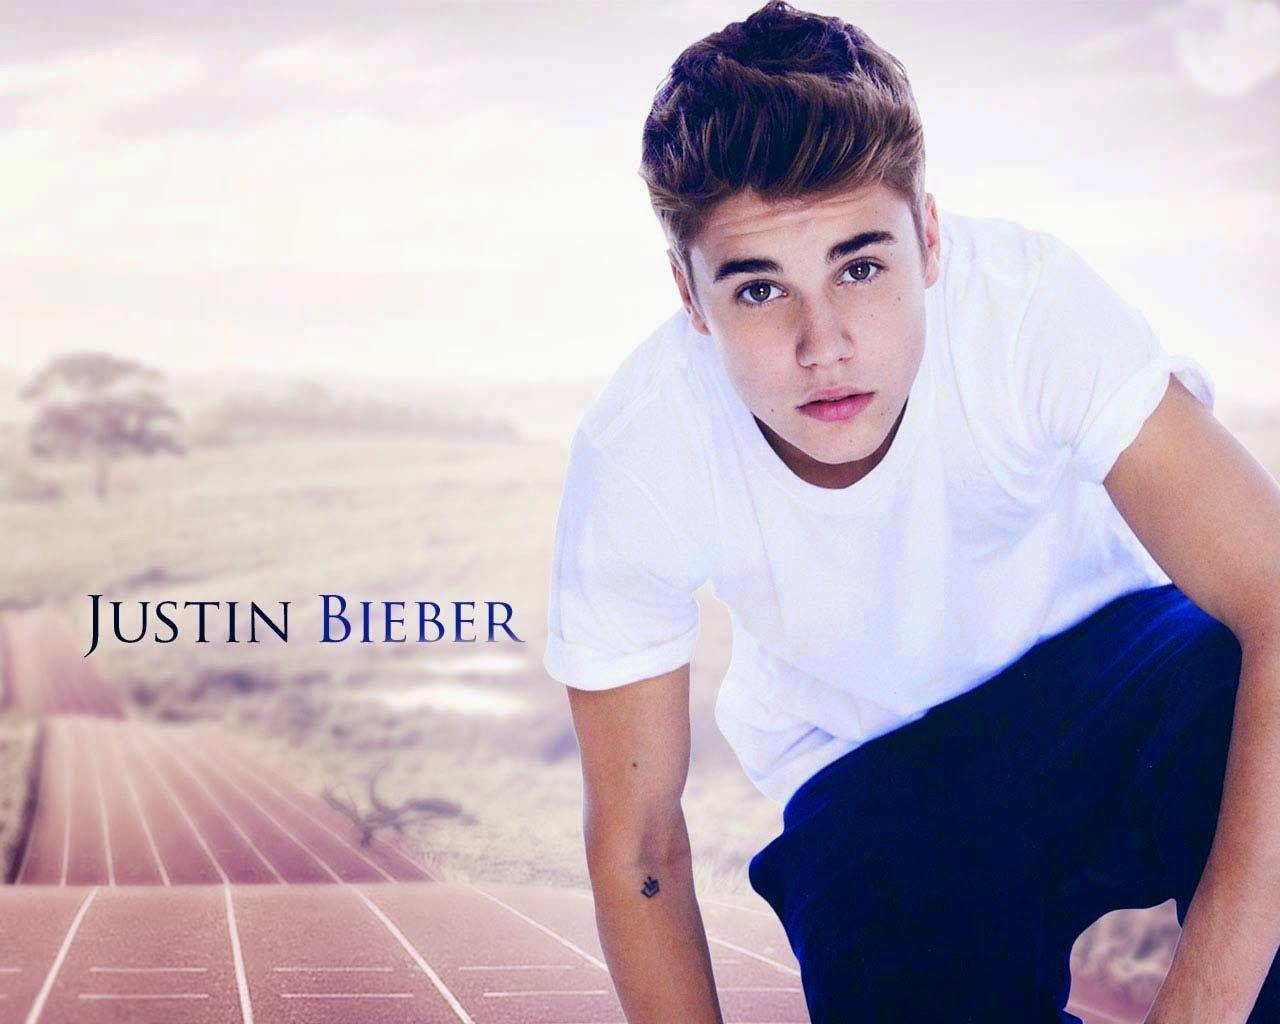 Justin Bieber Hd Wallpapers Top Free Justin Bieber Hd Backgrounds